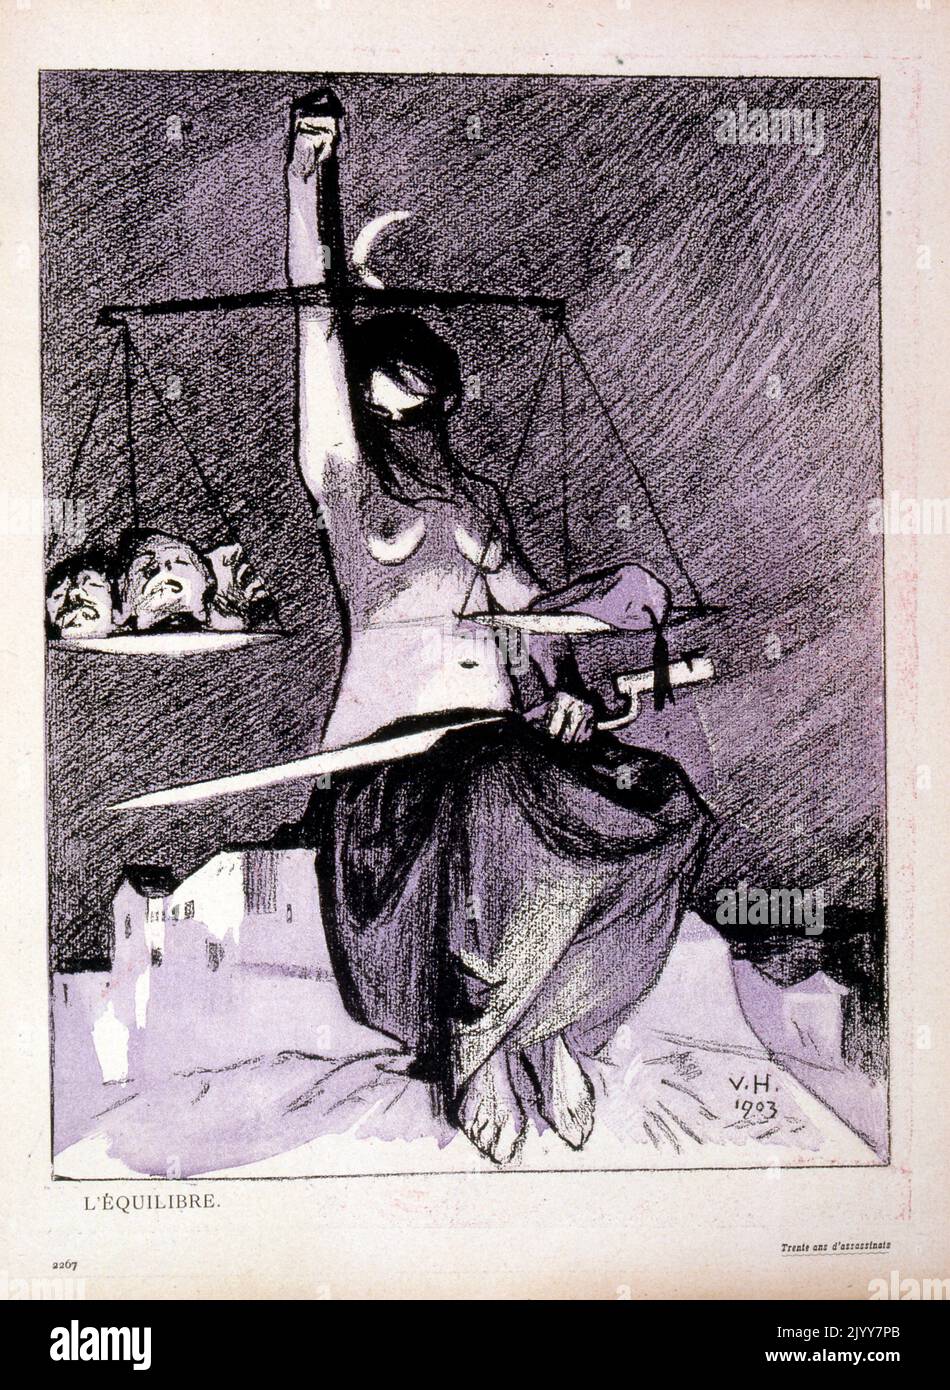 Black and white Illustration from the book Trente ans d'assassinates by V.H. (1903). Scales of justice holds the decapitated heads of men on one weight and a bag of money on the other; Lady Justice has sword in hand. Stock Photo